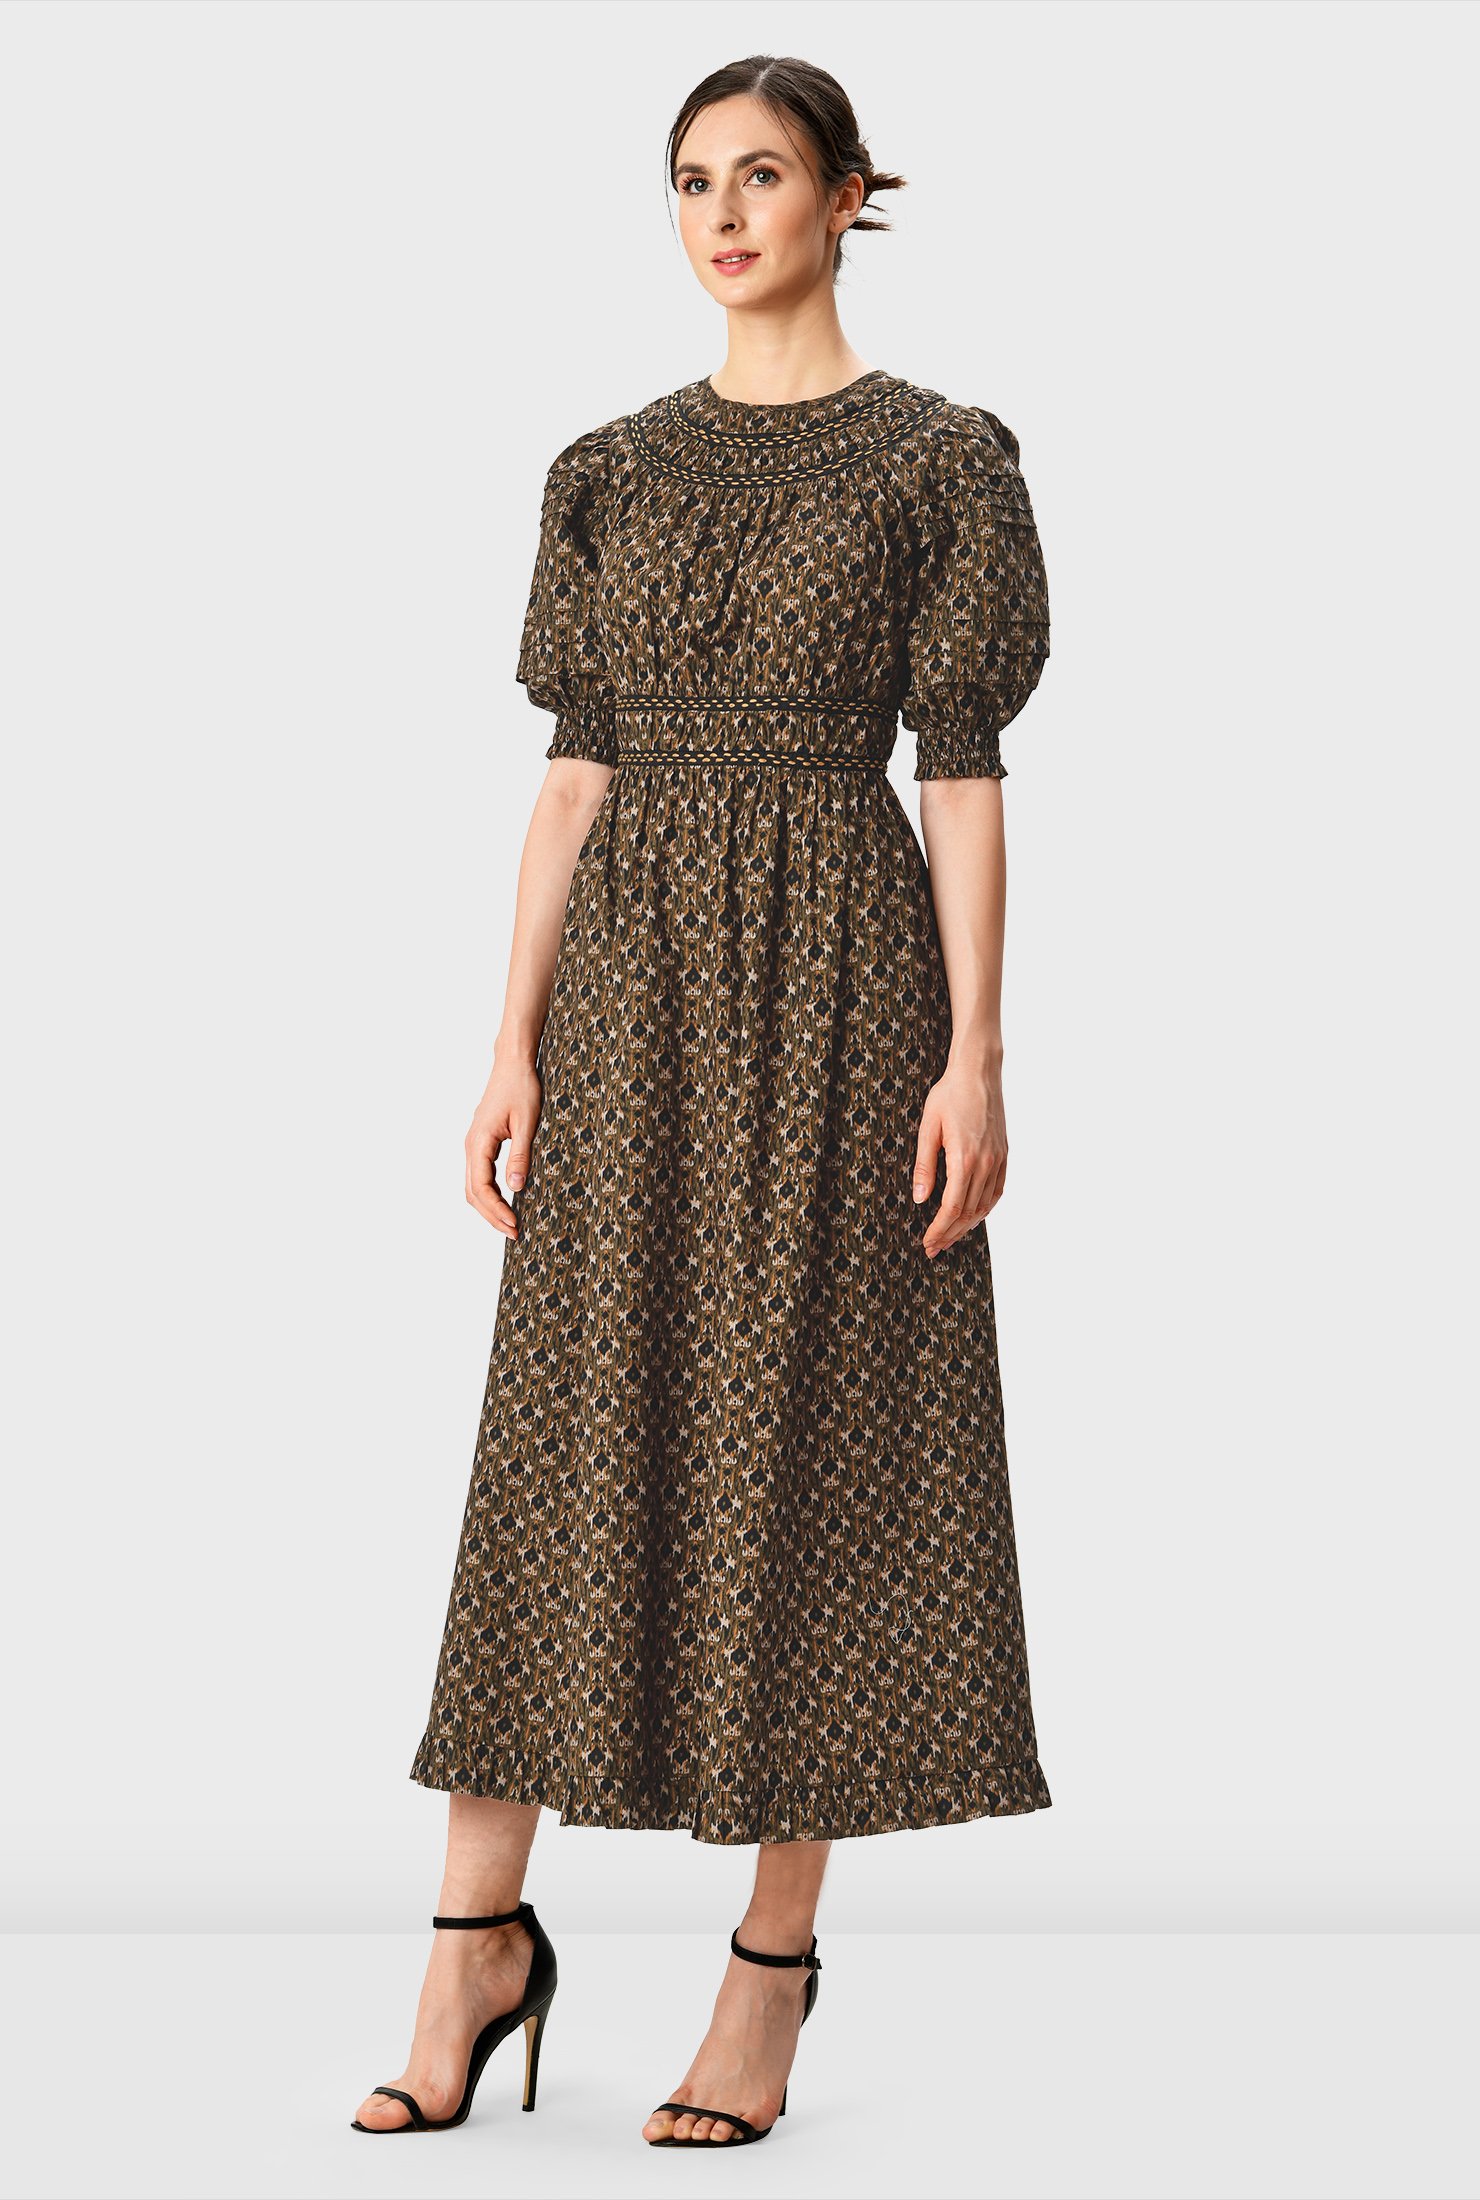 Earth-toned, breezy and heat-wave ready! Terracotta tones pattern our ikat print cotton poplin dress with stripe embroidery and shirred neckline and waist atop a ruched pleat full skirt with ruffle trim at the hem.